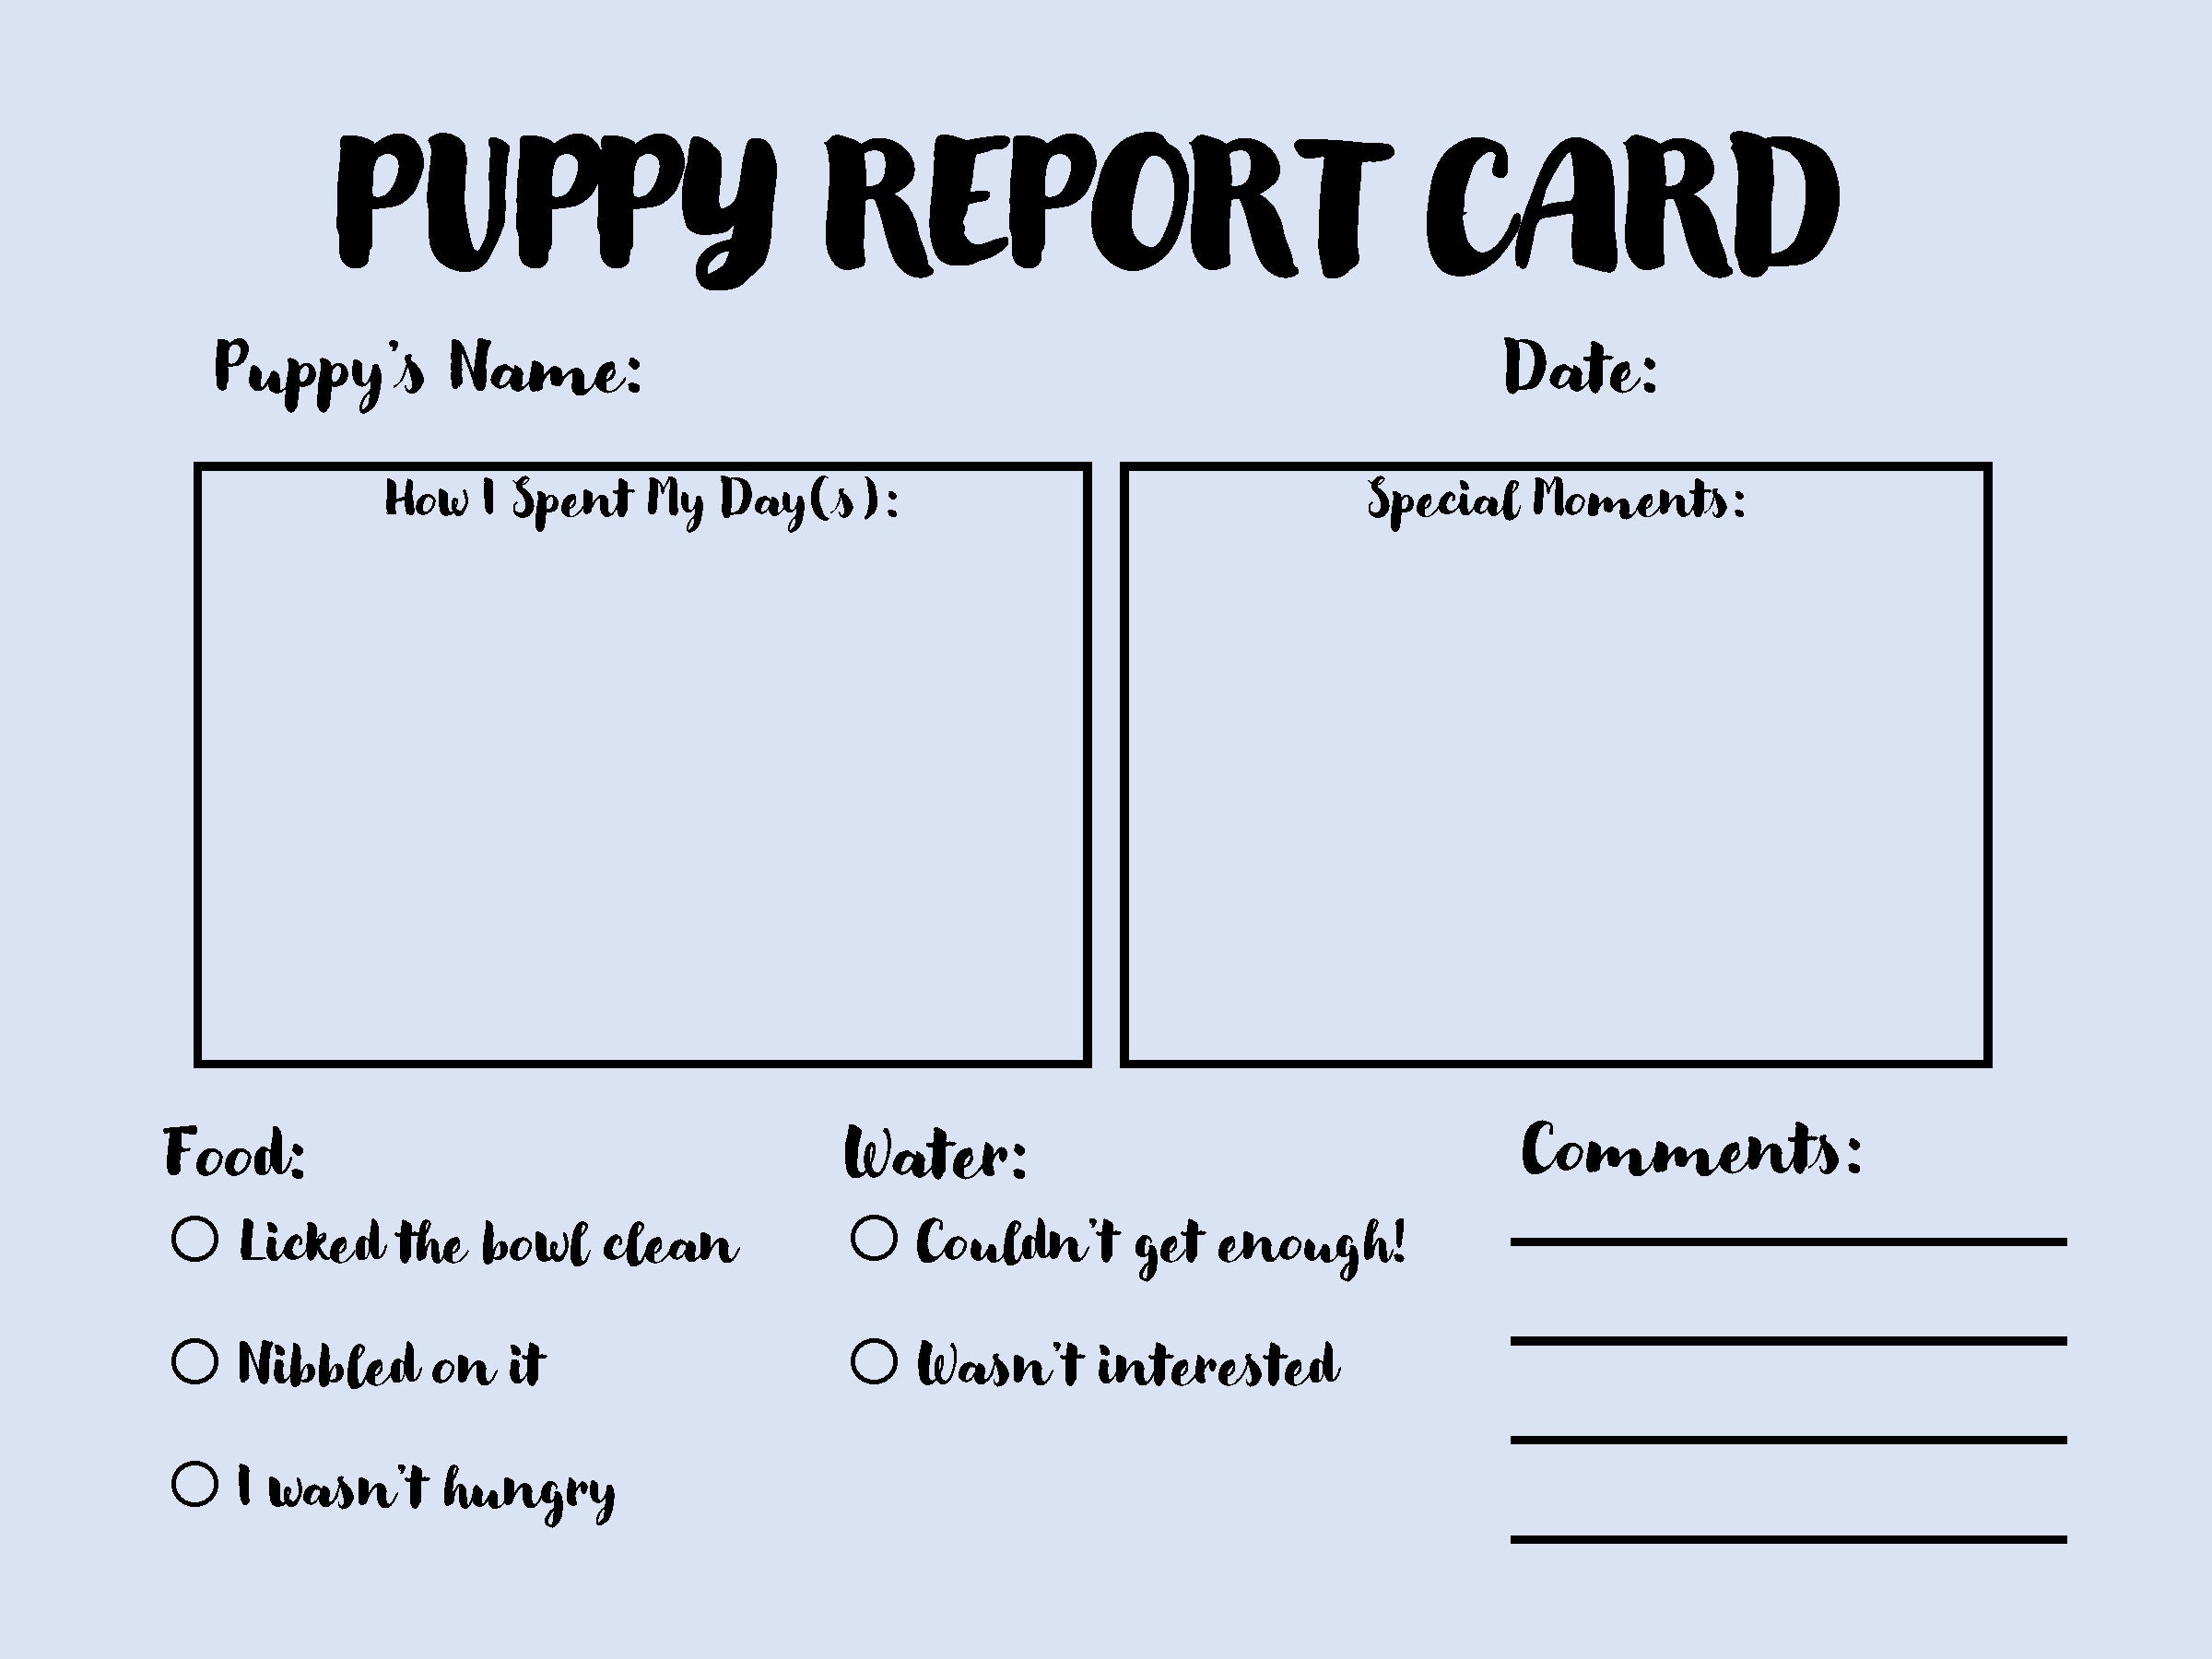 puppy-day-care-report-card-etsy